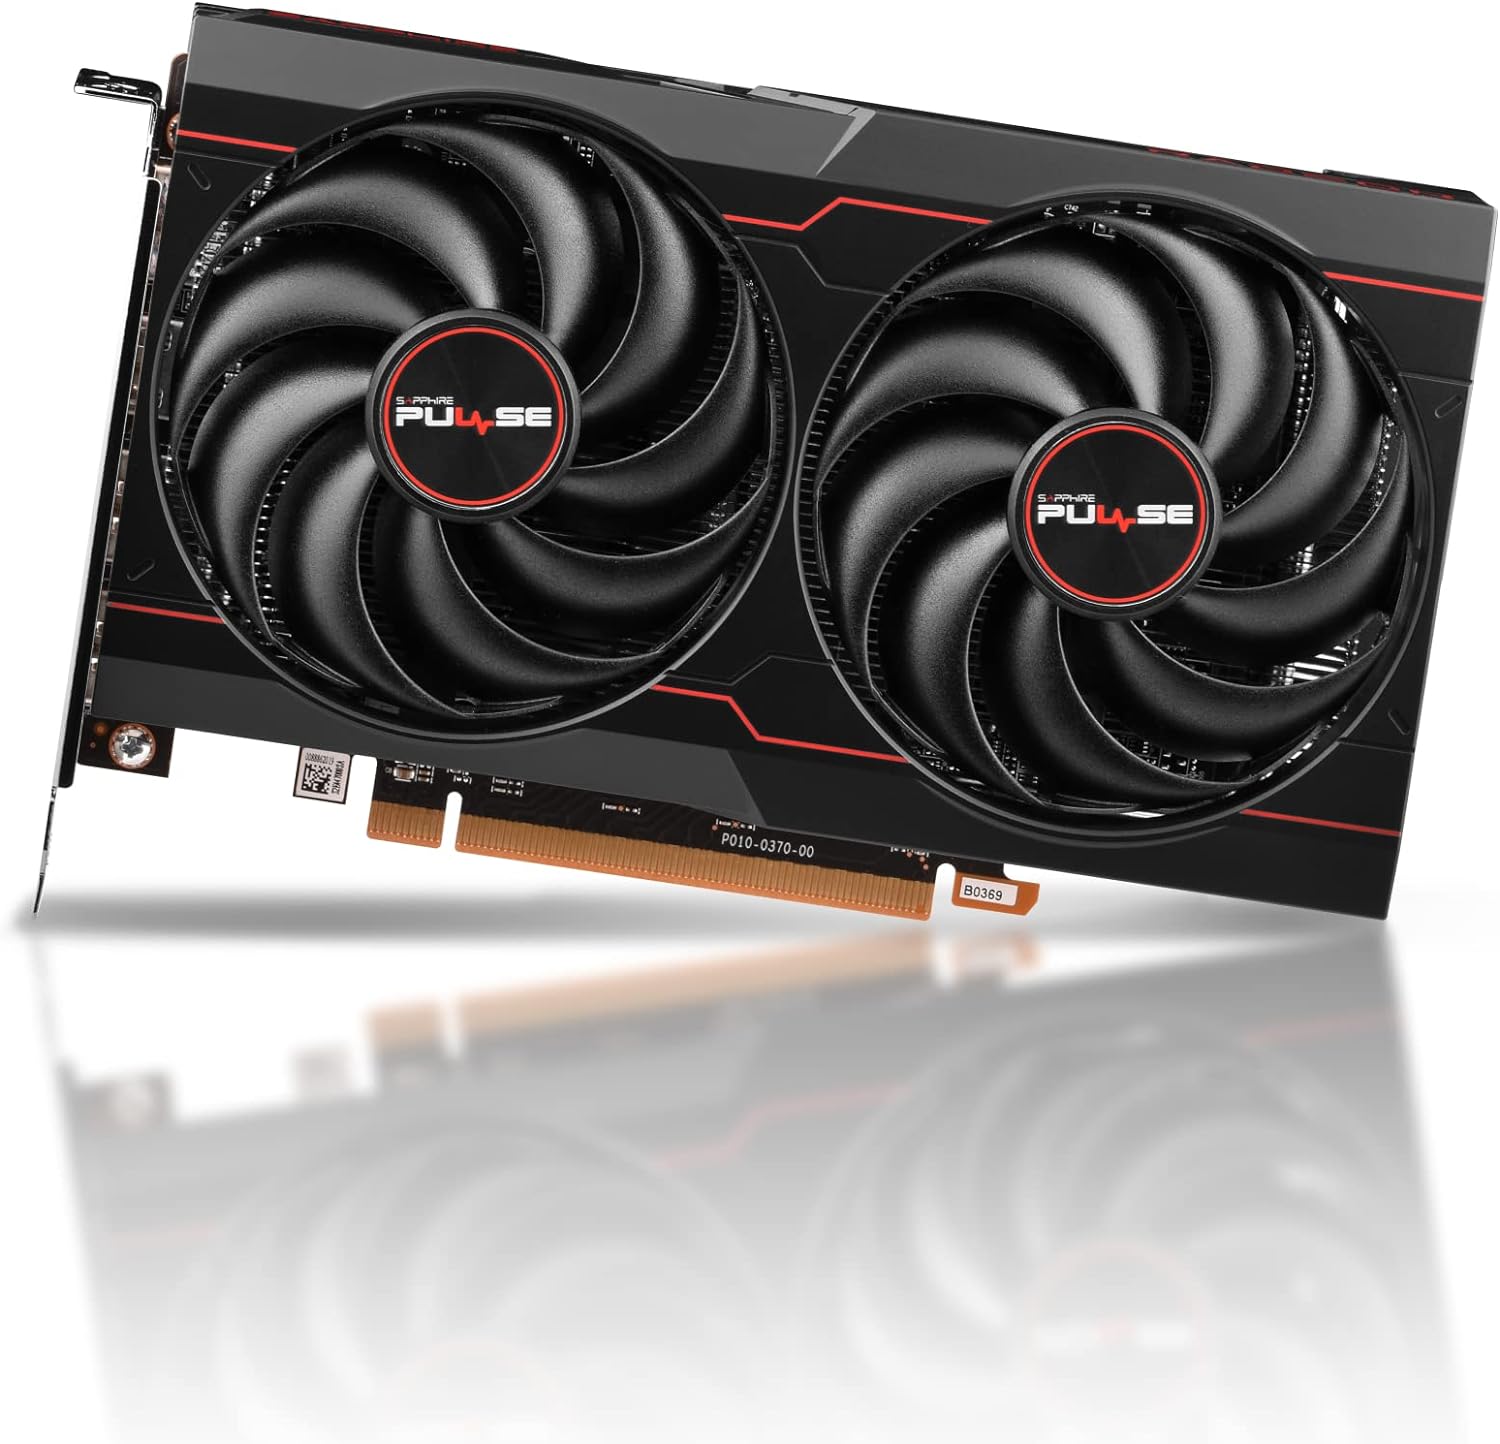 Sapphire 11310-01-20G Pulse AMD Radeon RX 6600 Gaming Graphics Card with 8GB GDDR6, AMD RDNA 2